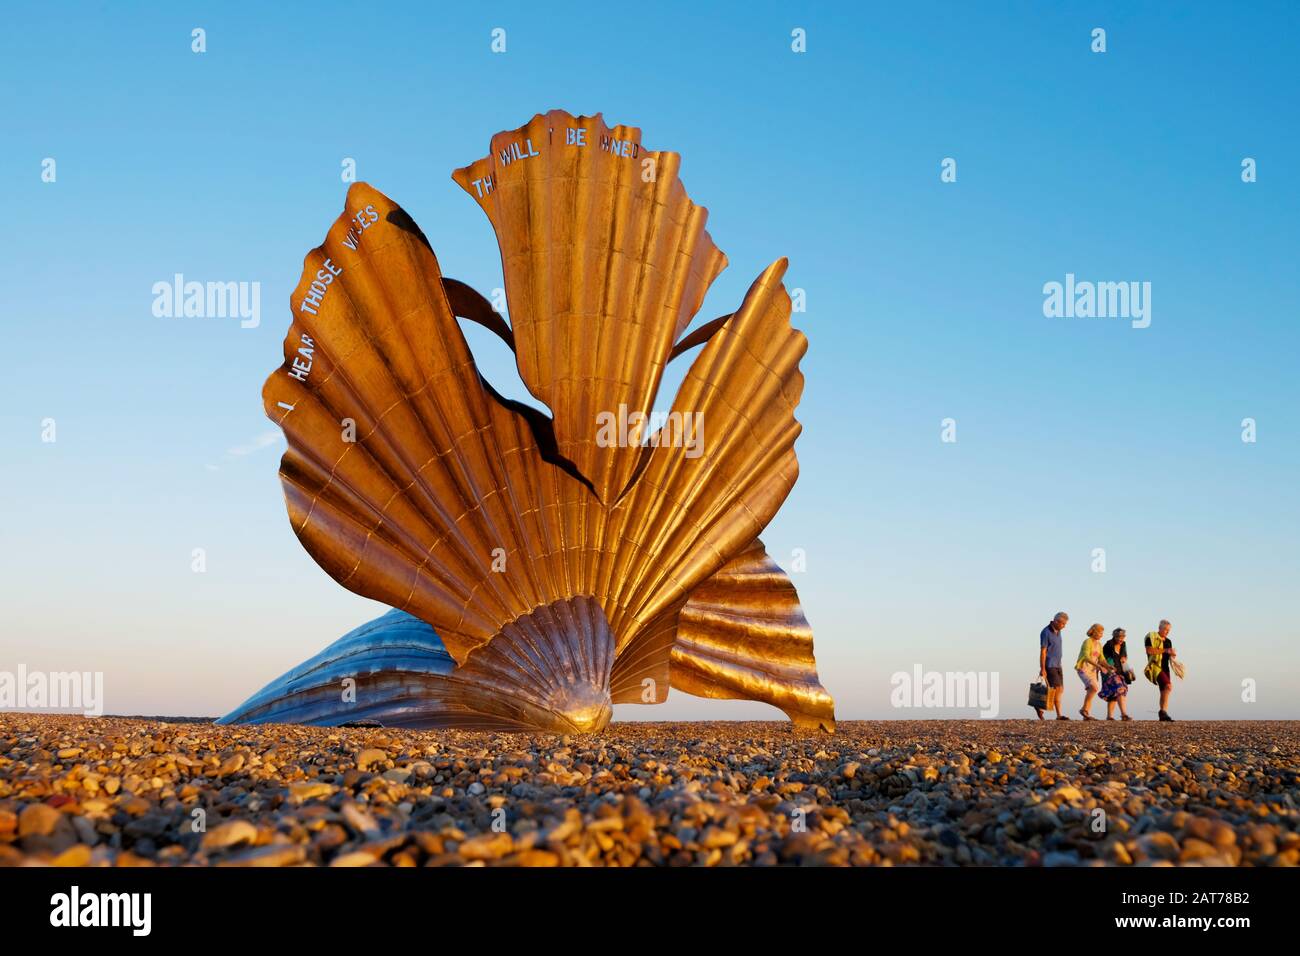 Tourists walking by the Aldeburgh Scallop shell sculpture created by Maggi Hambling. Aldeburgh, Suffolk. UK Stock Photo